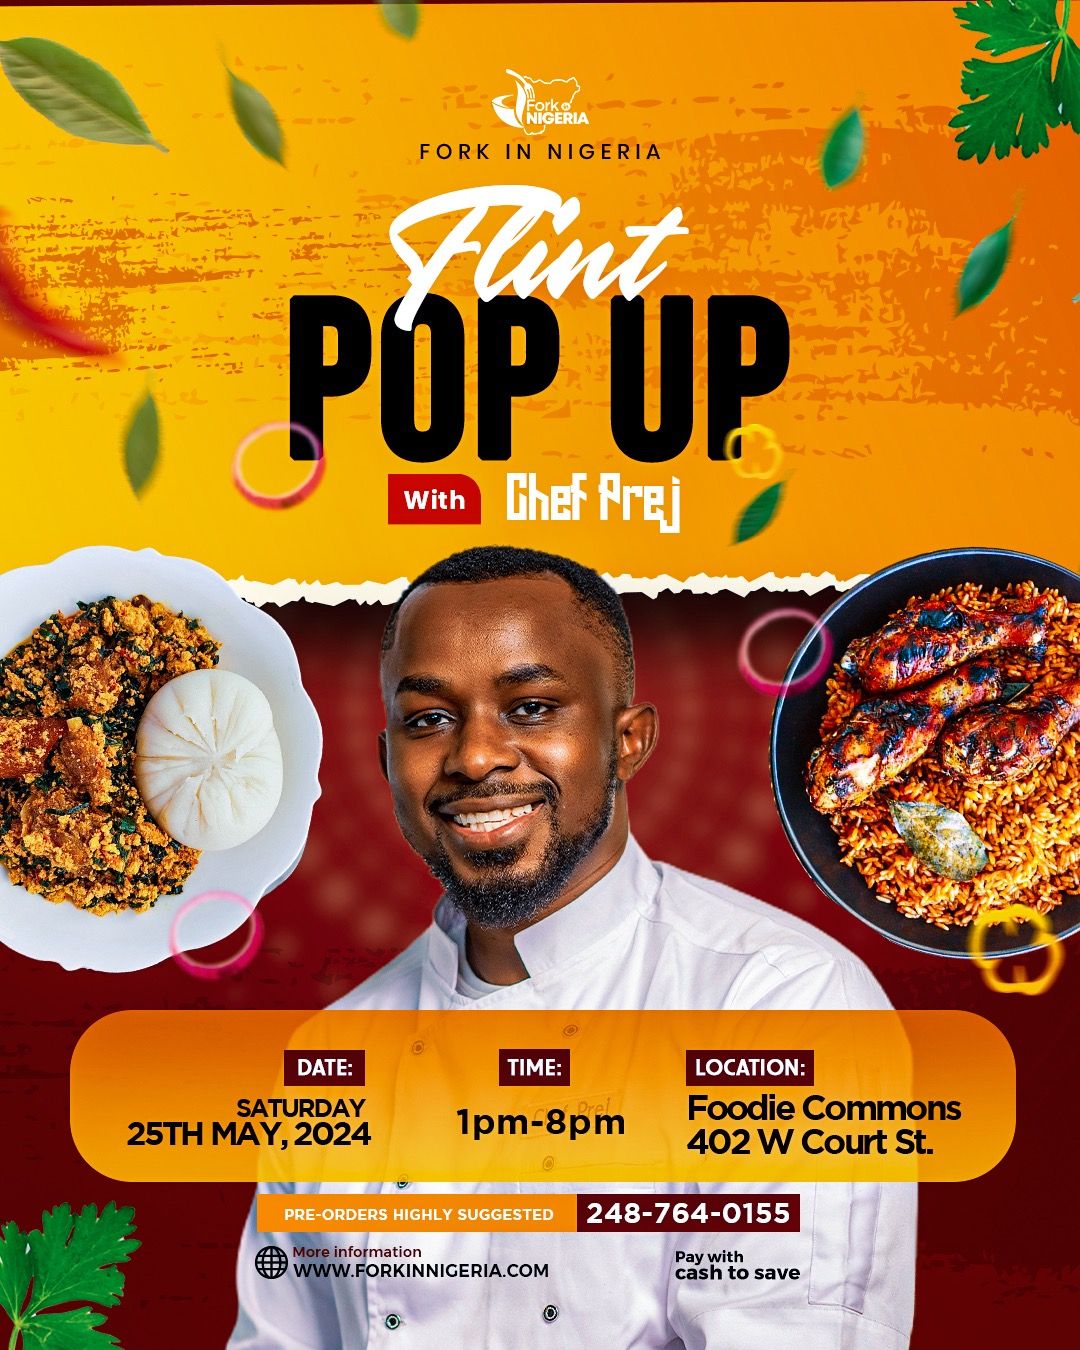 African Food Truck Pop up with Chef Prej